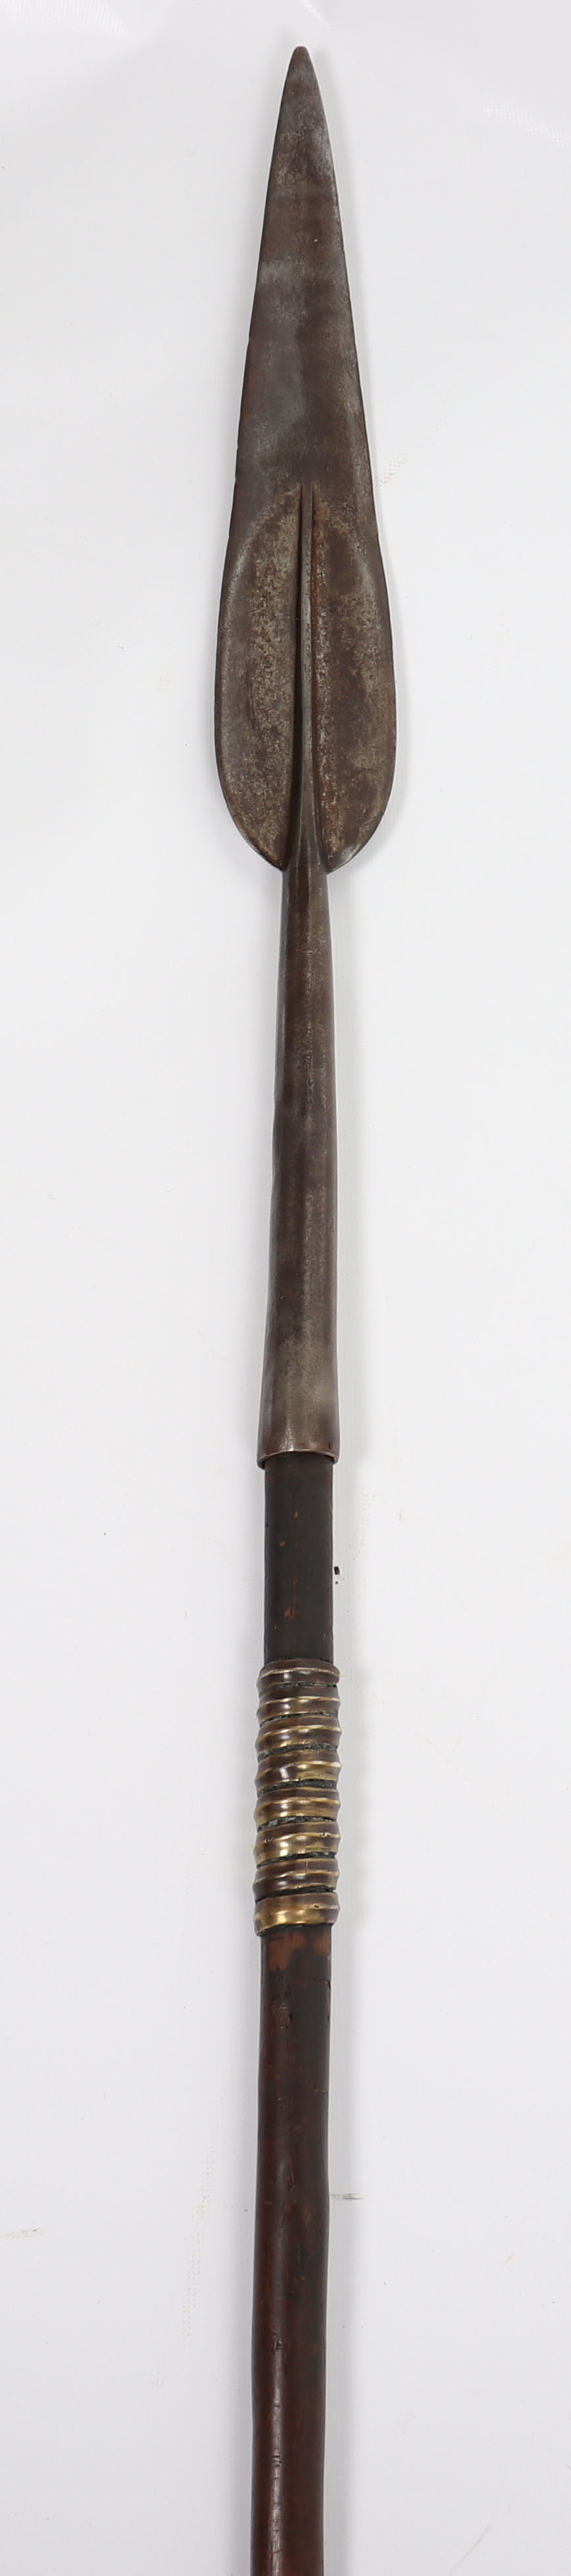 Sudanese Spear c.1880 - Image 6 of 9